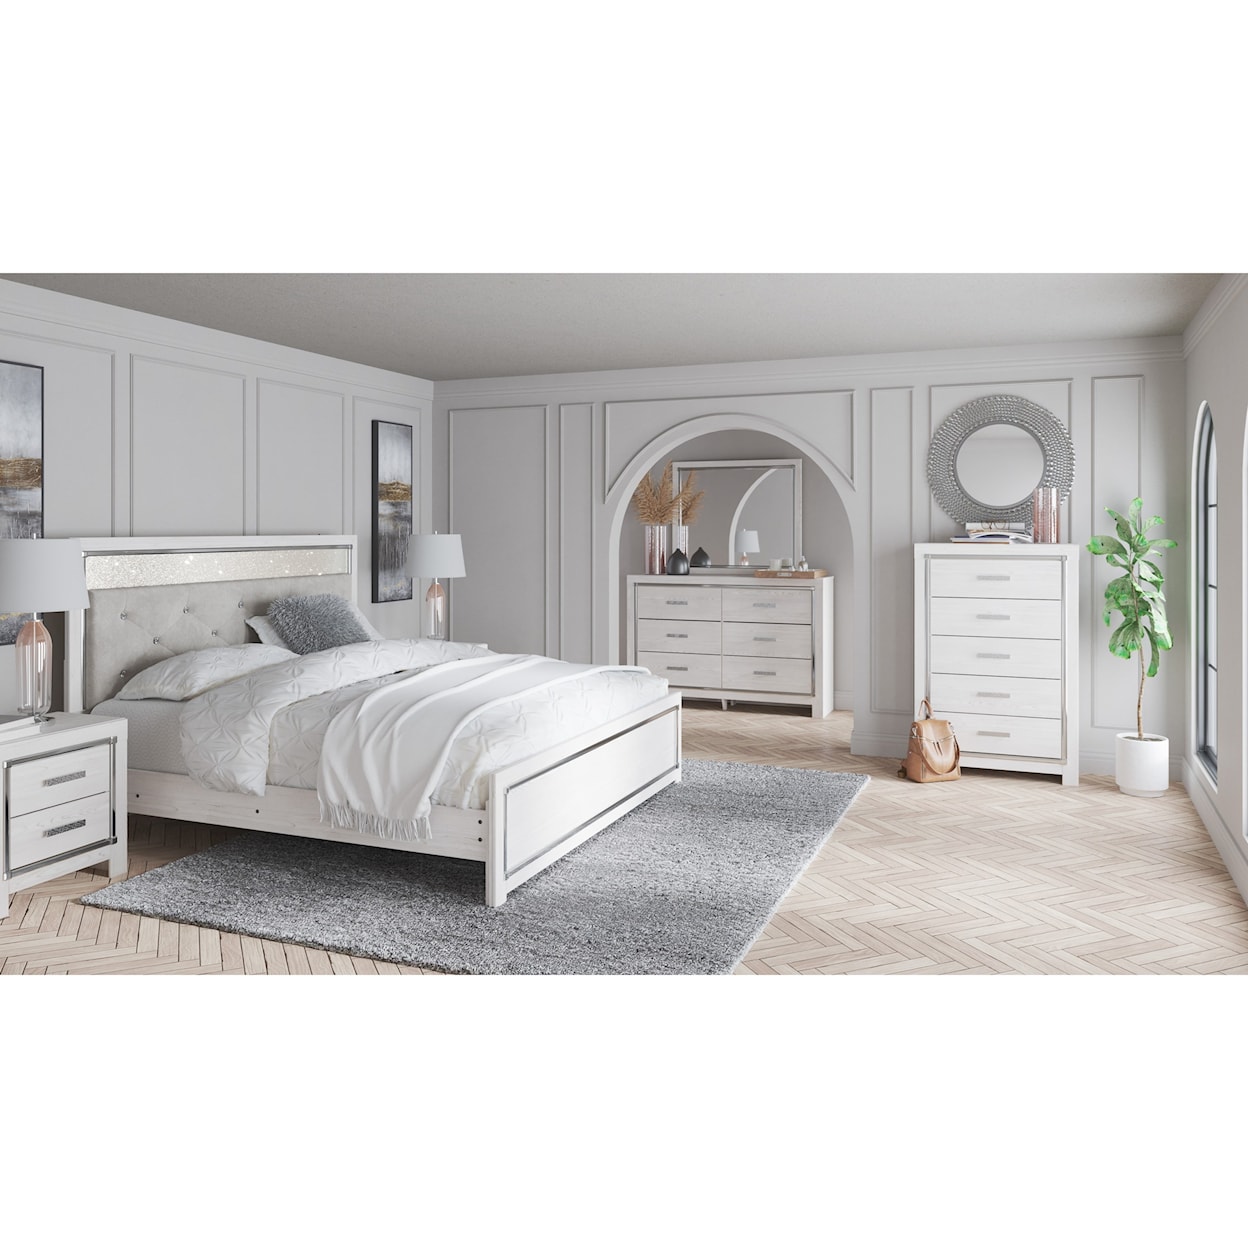 Ashley Signature Design Altyra King Bedroom Group